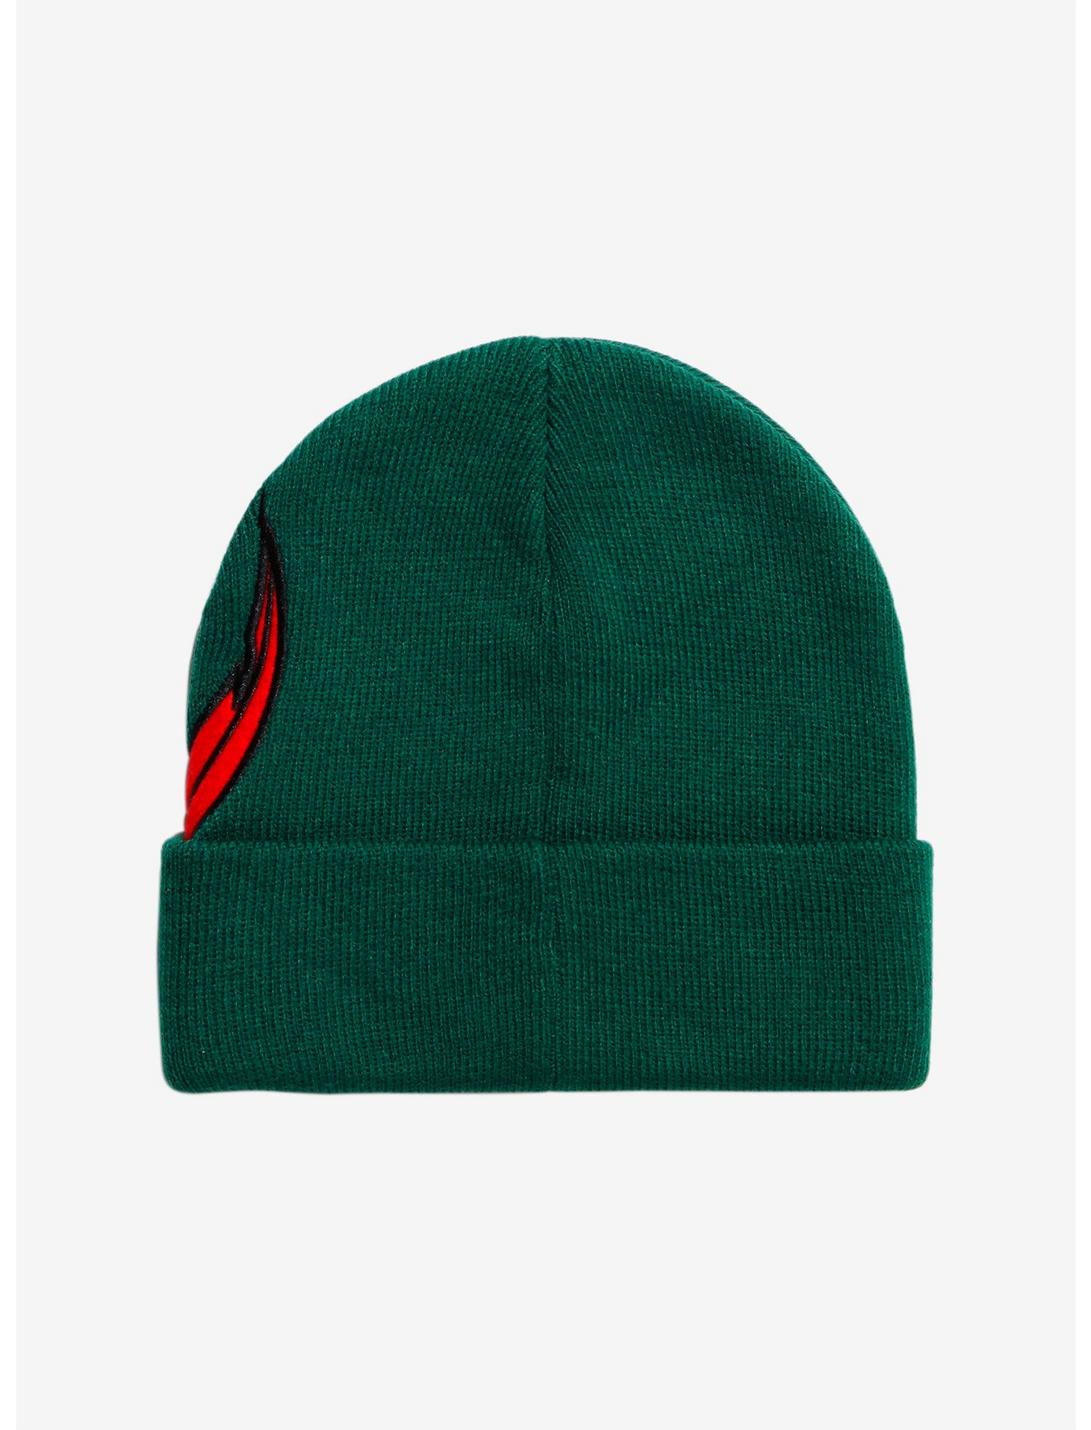 Peter Pan Red Feather Beanie, , hi-res